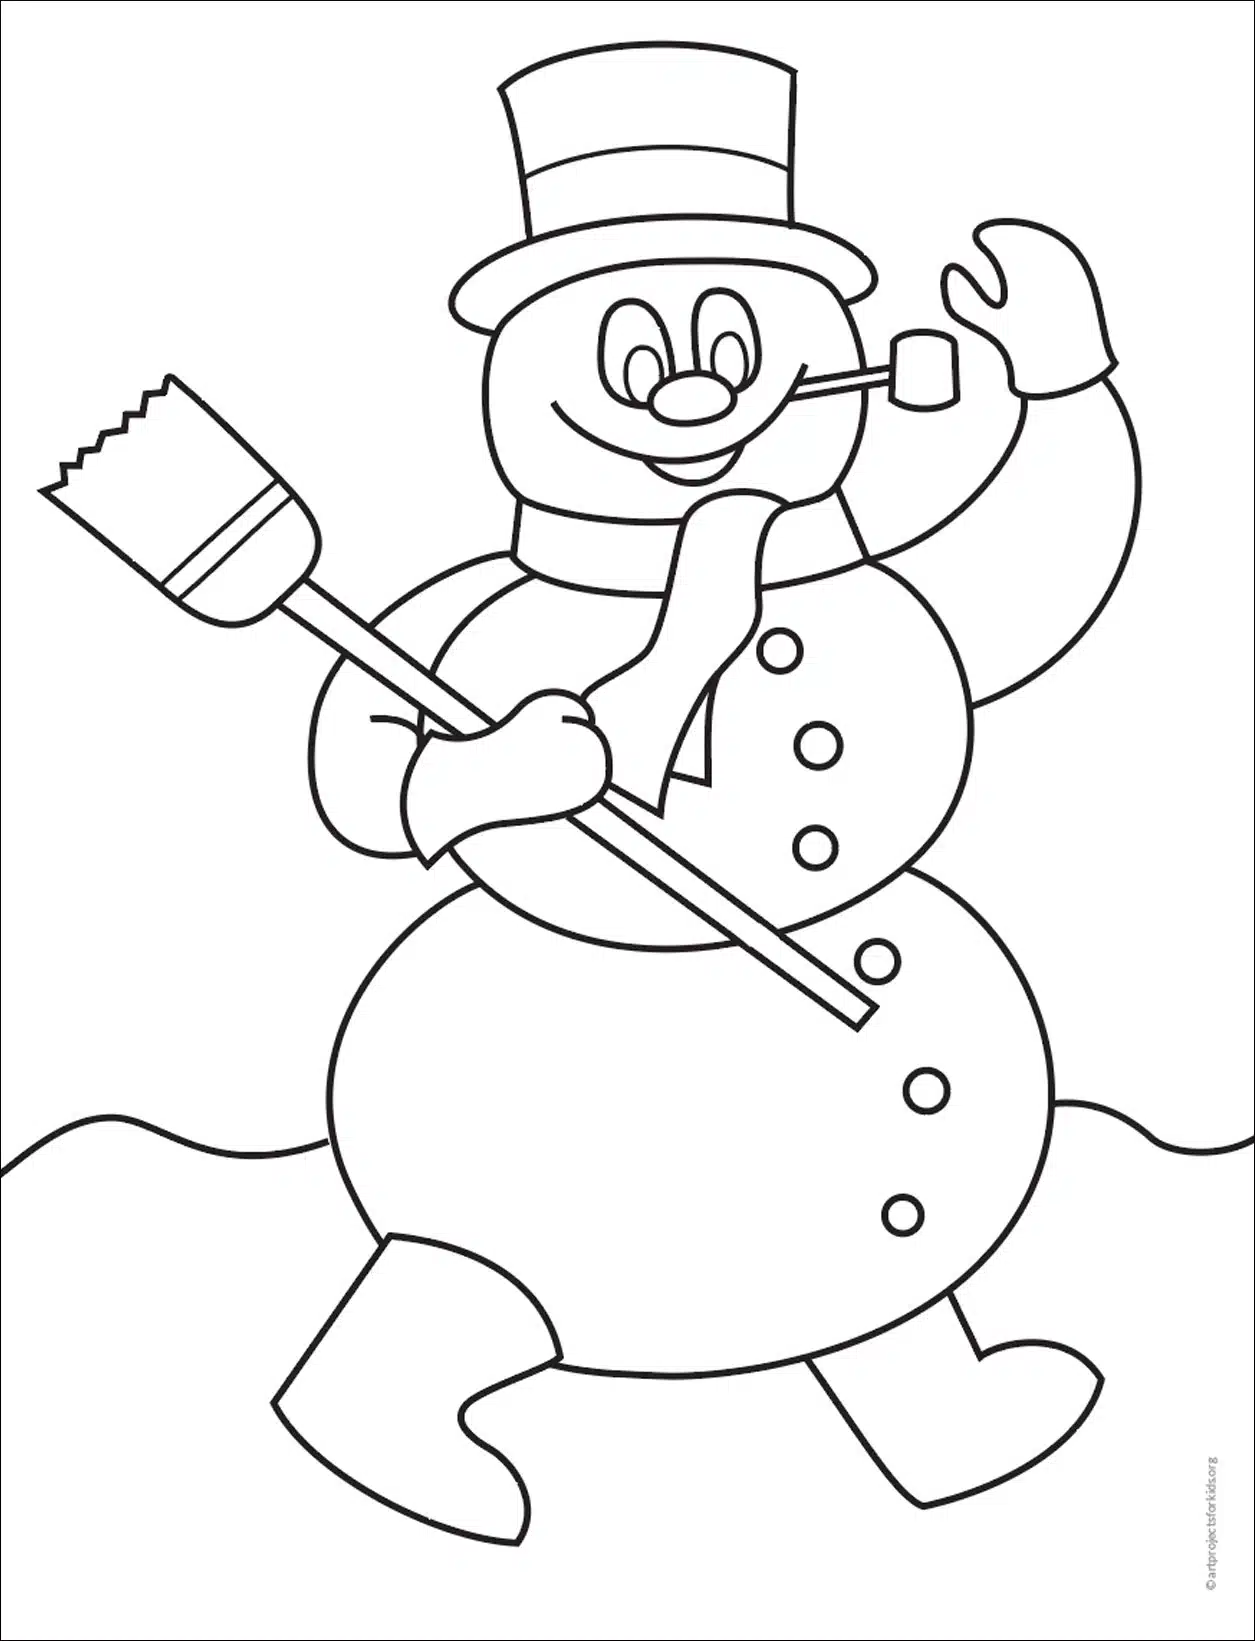 Build A Snowman Winter Art Activity for Kids - Look! We're Learning!